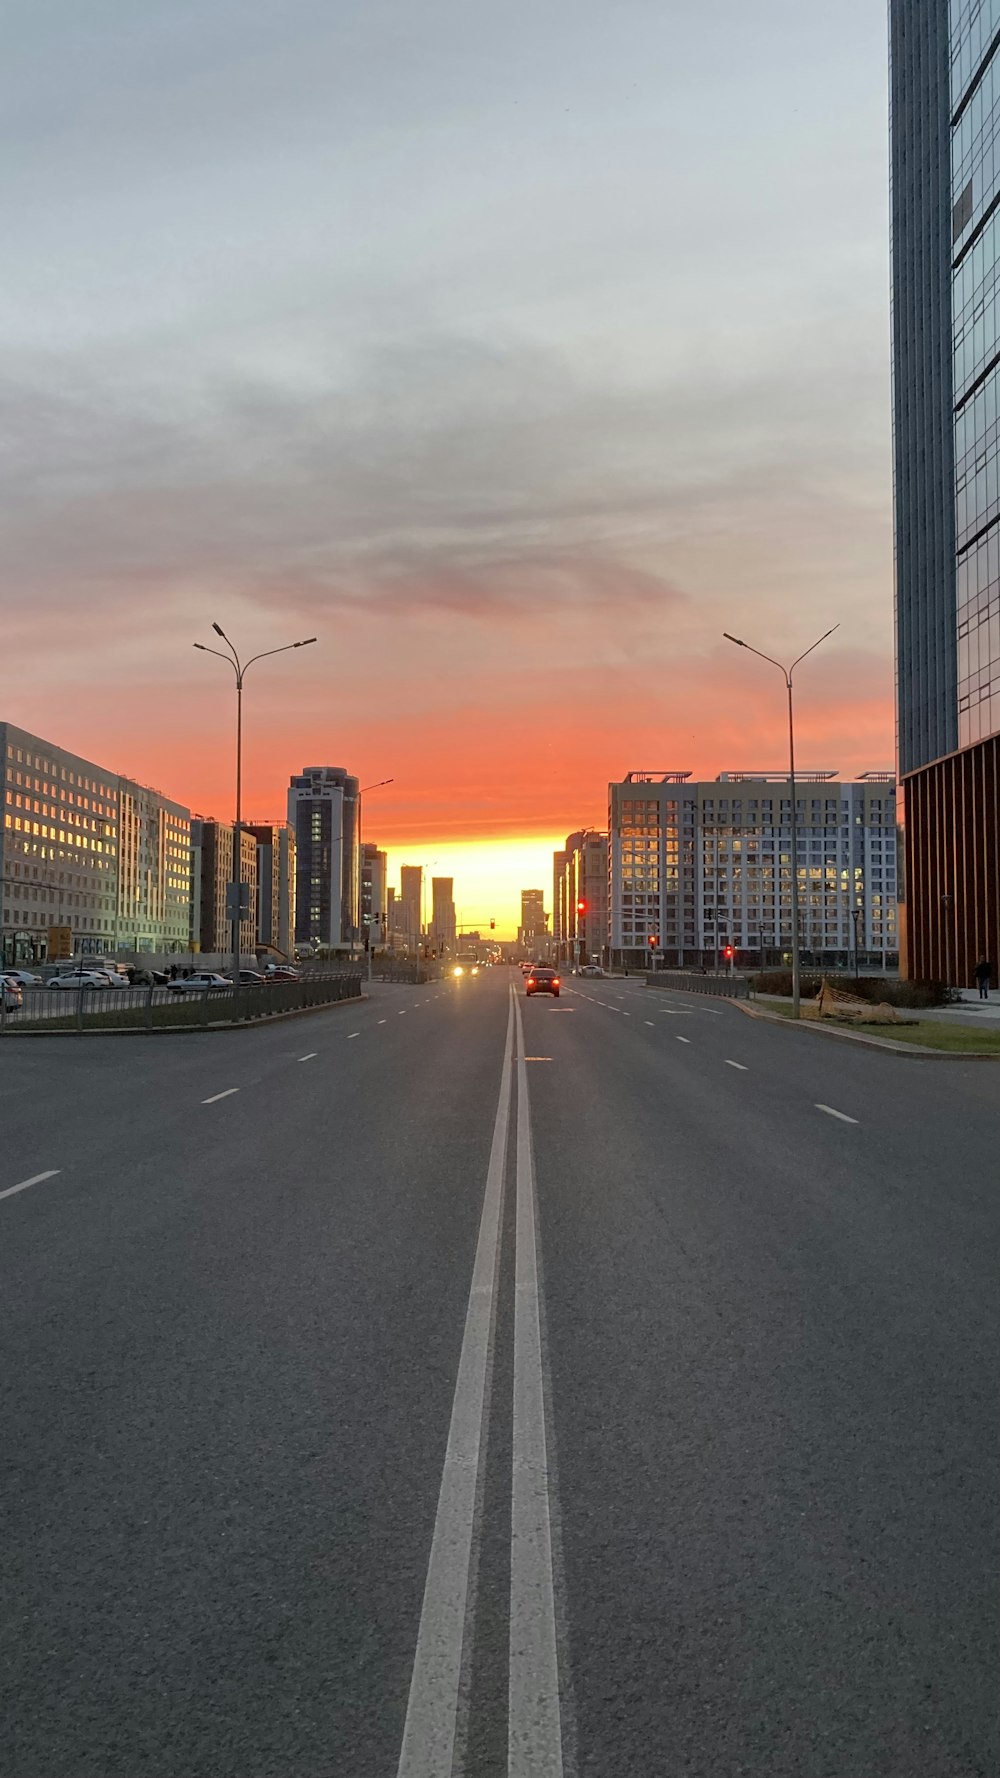 the sun is setting over a city street